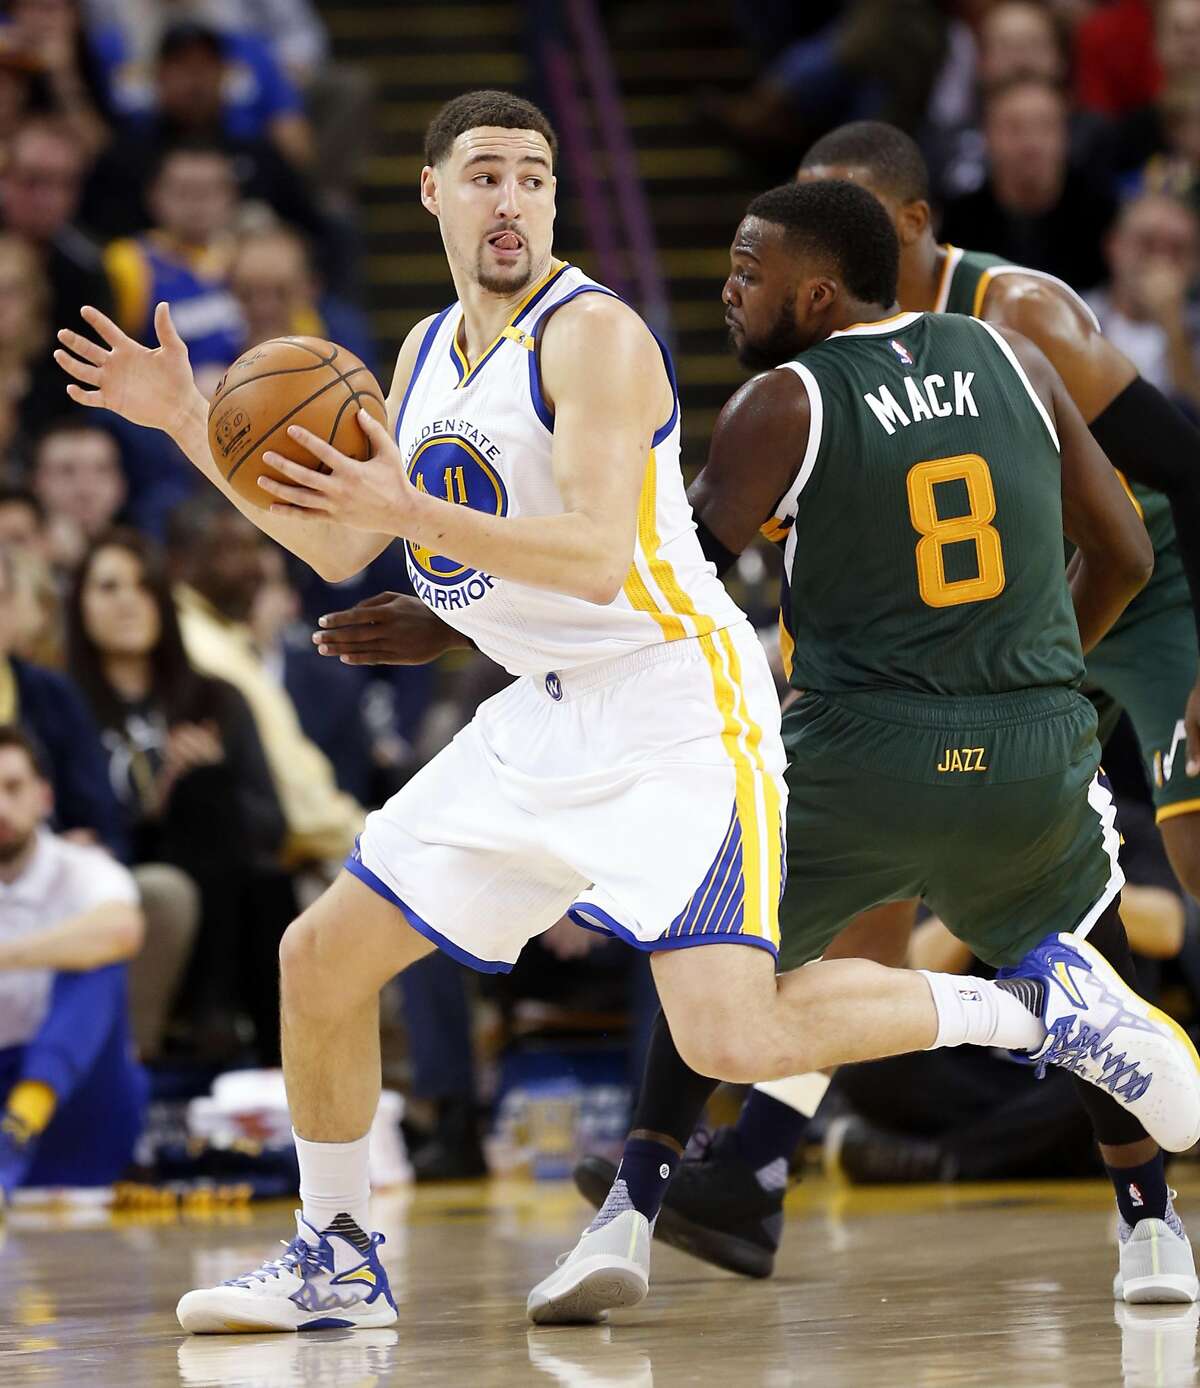 Golden State Warriors' Klay Thompson makes a spin move against Utah Jazz' Shelvin Mack in 2nd quarter during NBA game at Oracle Arena in Oakland, Calif., on Tuesday, December 20, 2016.